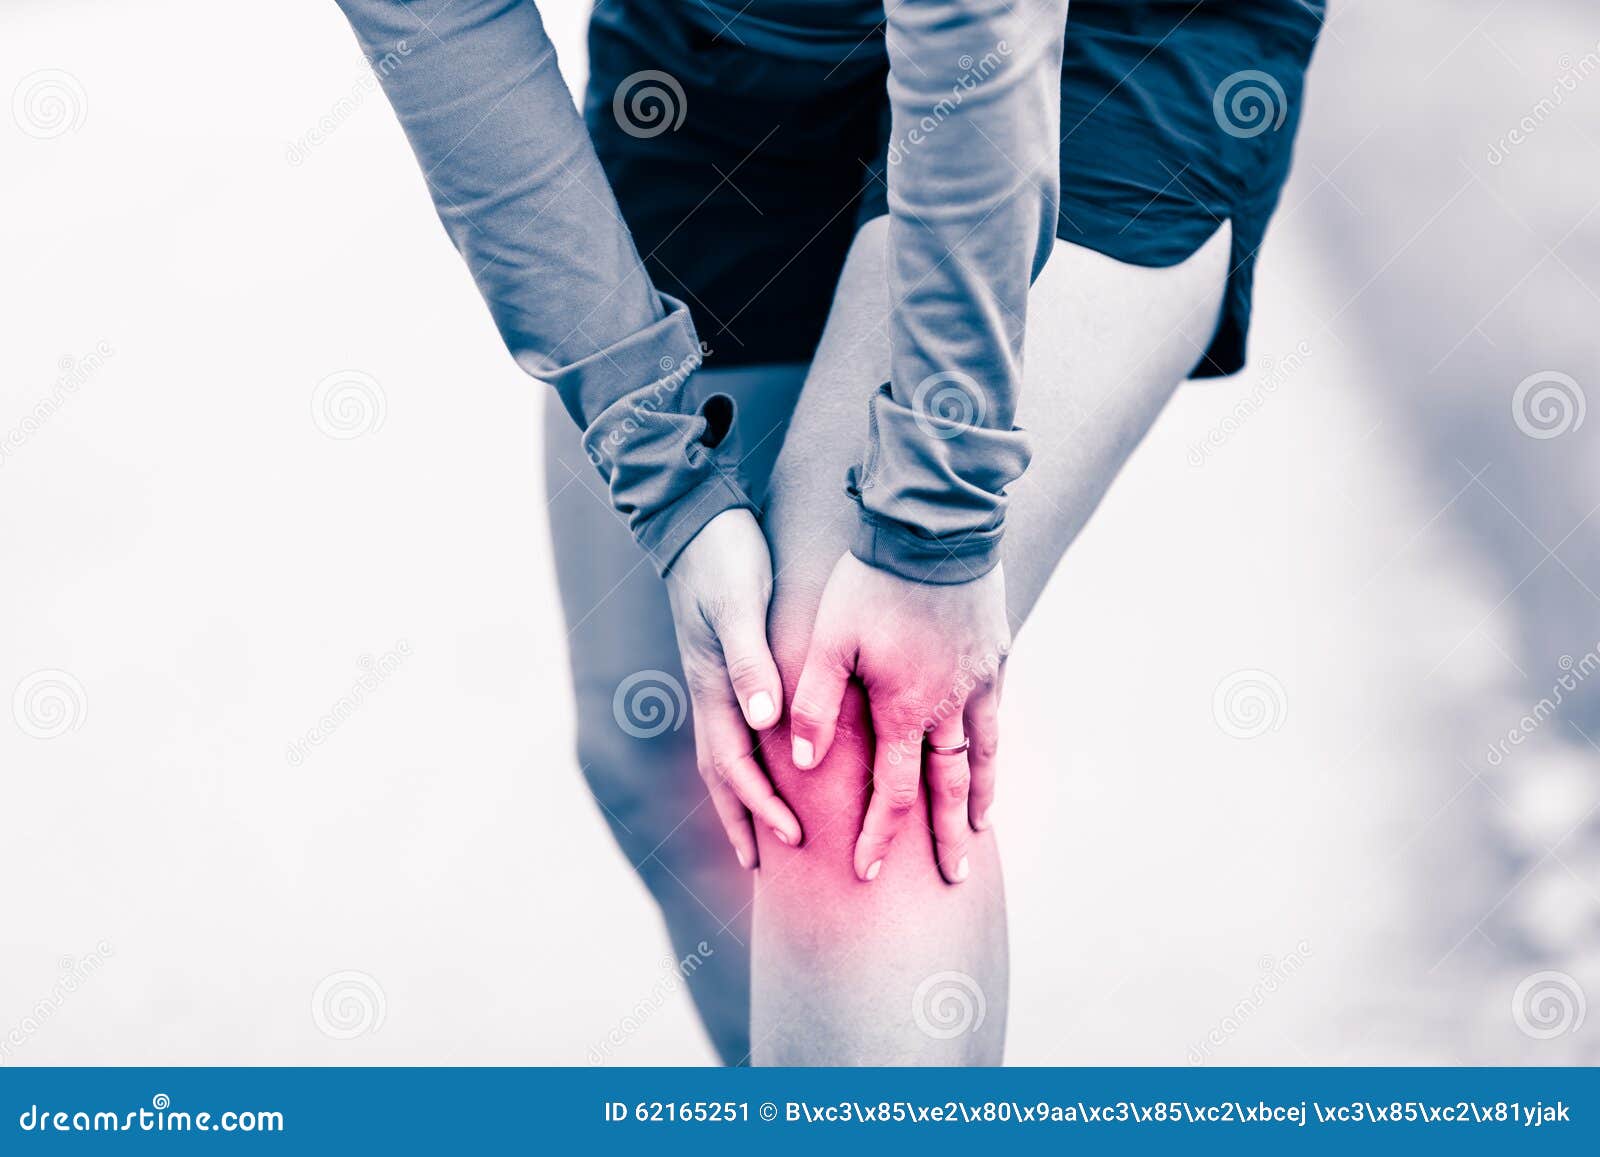 knee pain, woman holding sore and painful leg